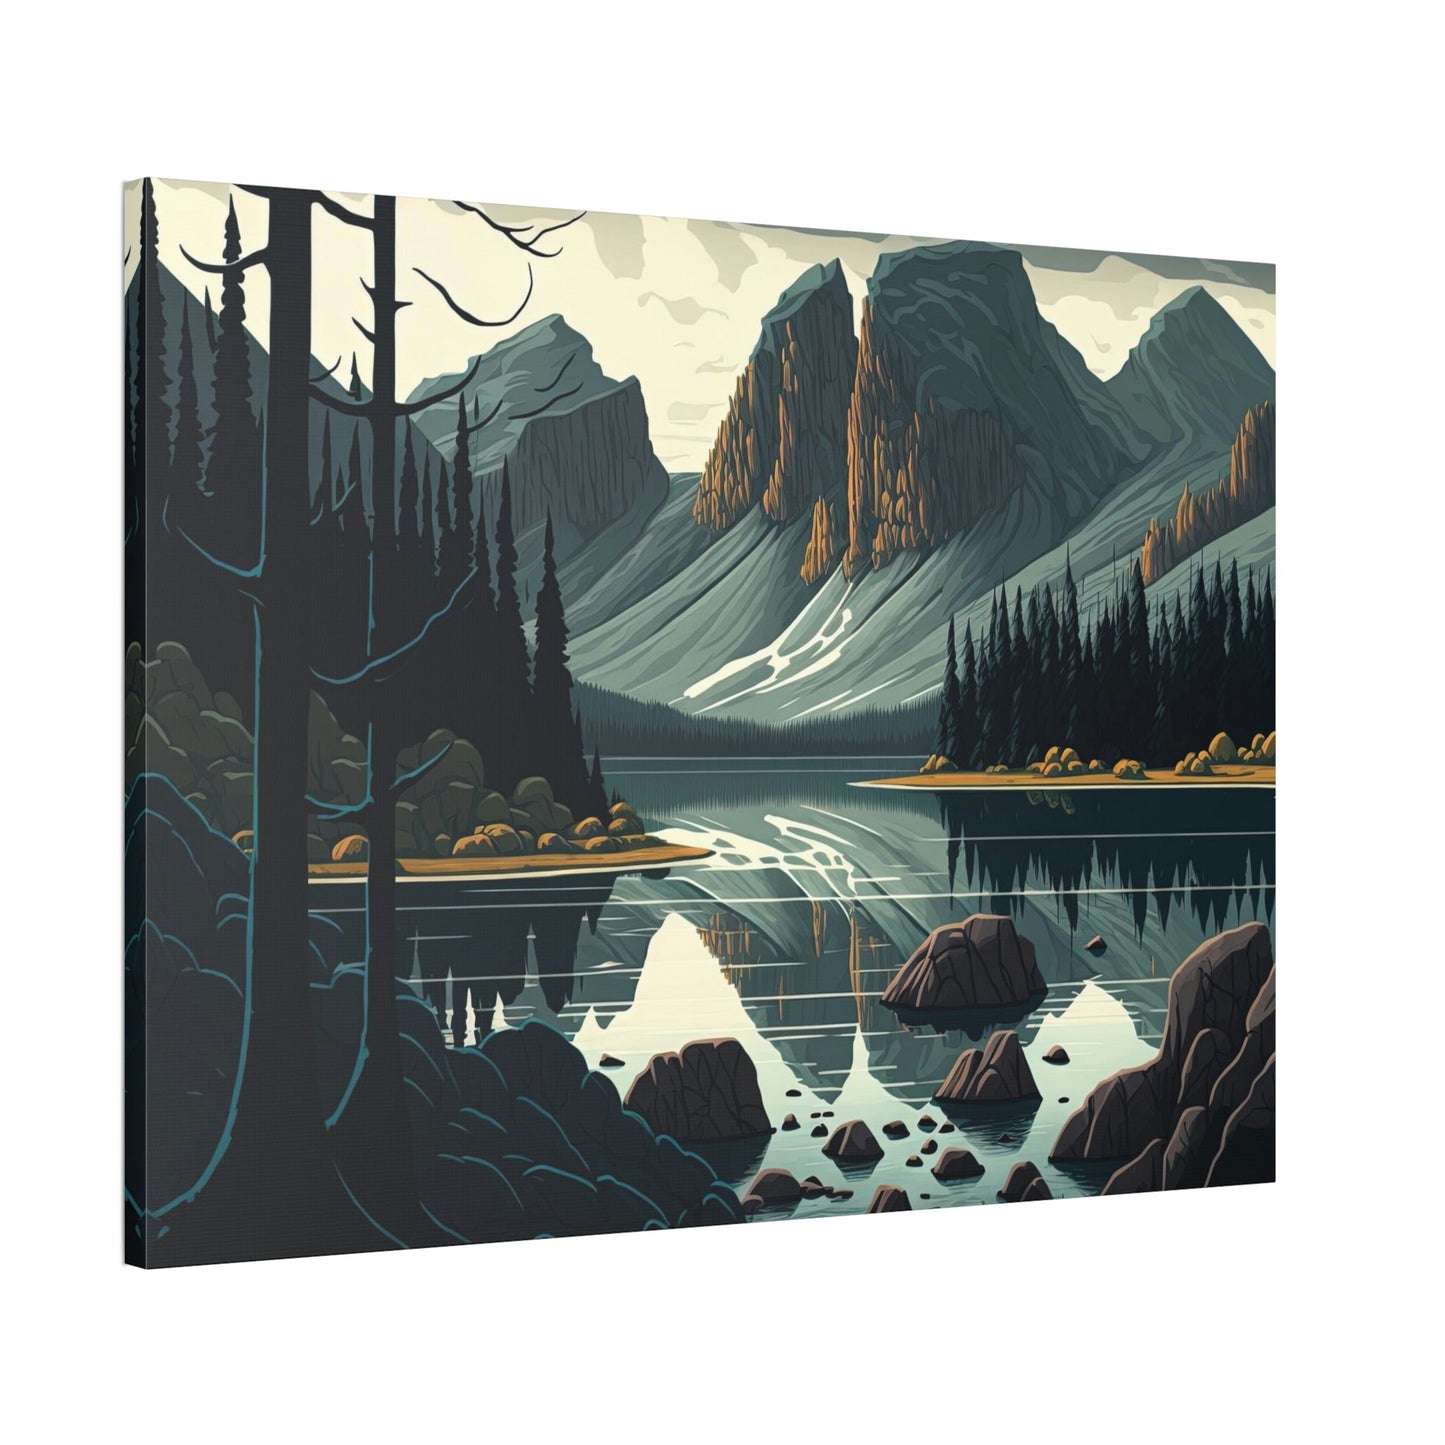 Reflections of the Lake: Framed Canvas Print of a Scenic Lake Scene